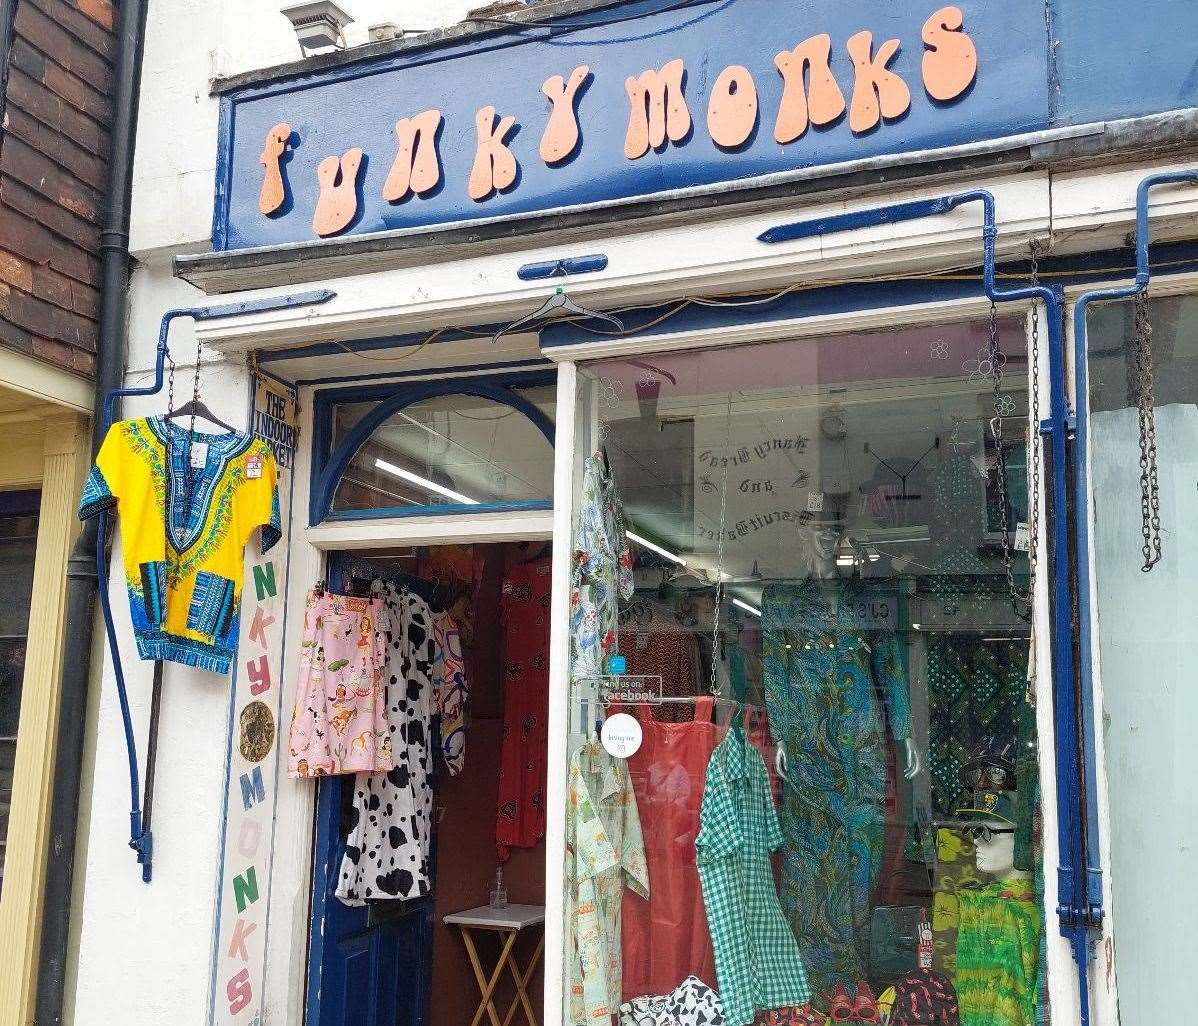 Funky Monks in Canterbury is closing after 26 years